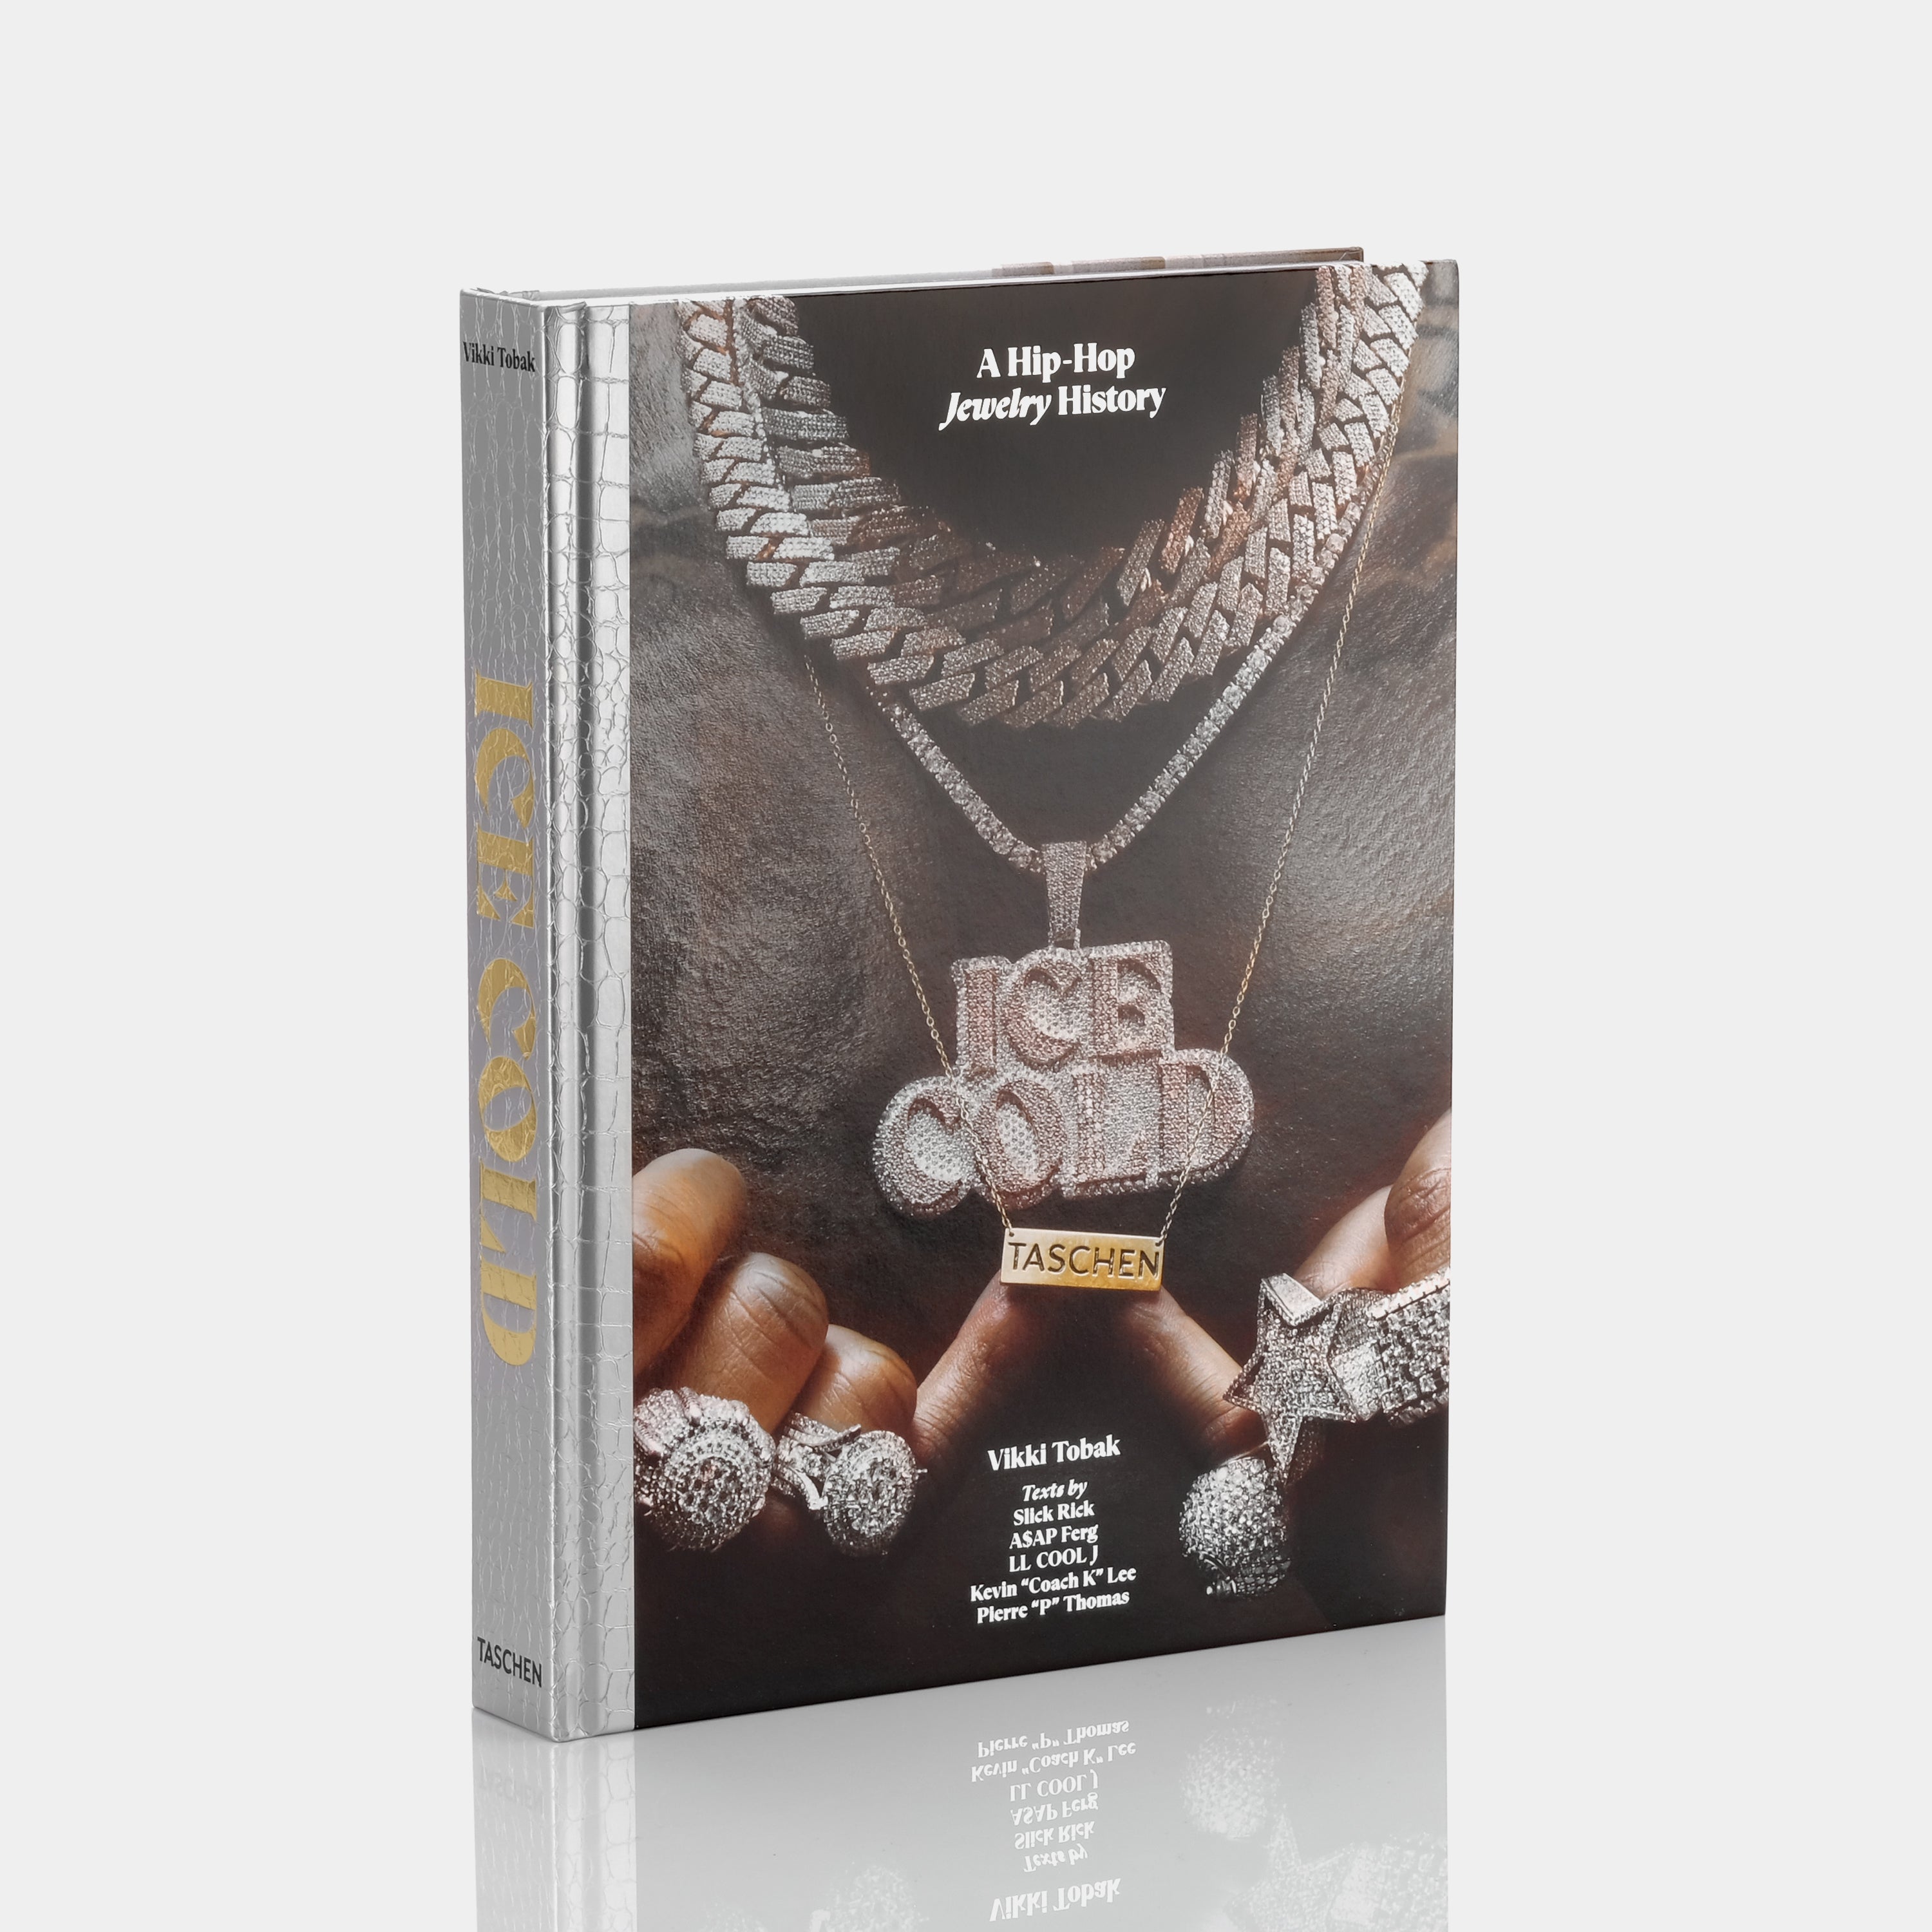 Ice Cold. A Hip-Hop Jewelry History XL Taschen Book